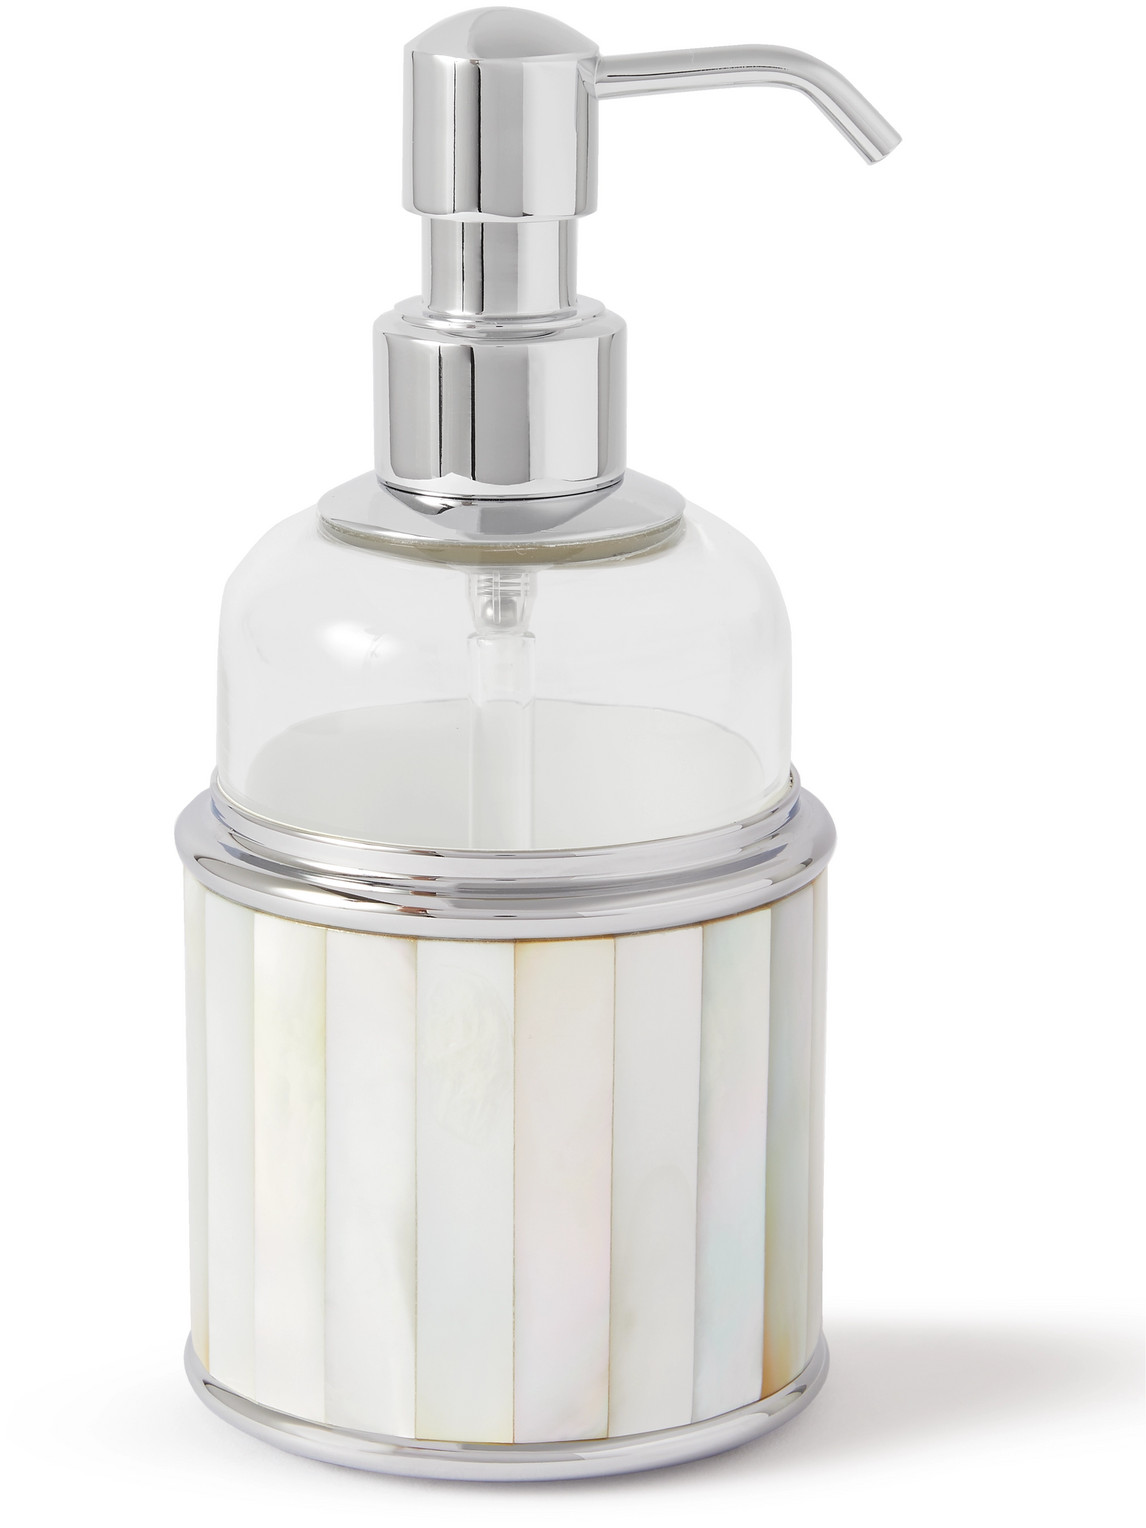 Lorenzi Milano Glass, Mother-of-pearl And Chrome-plated Soap Dispenser In White